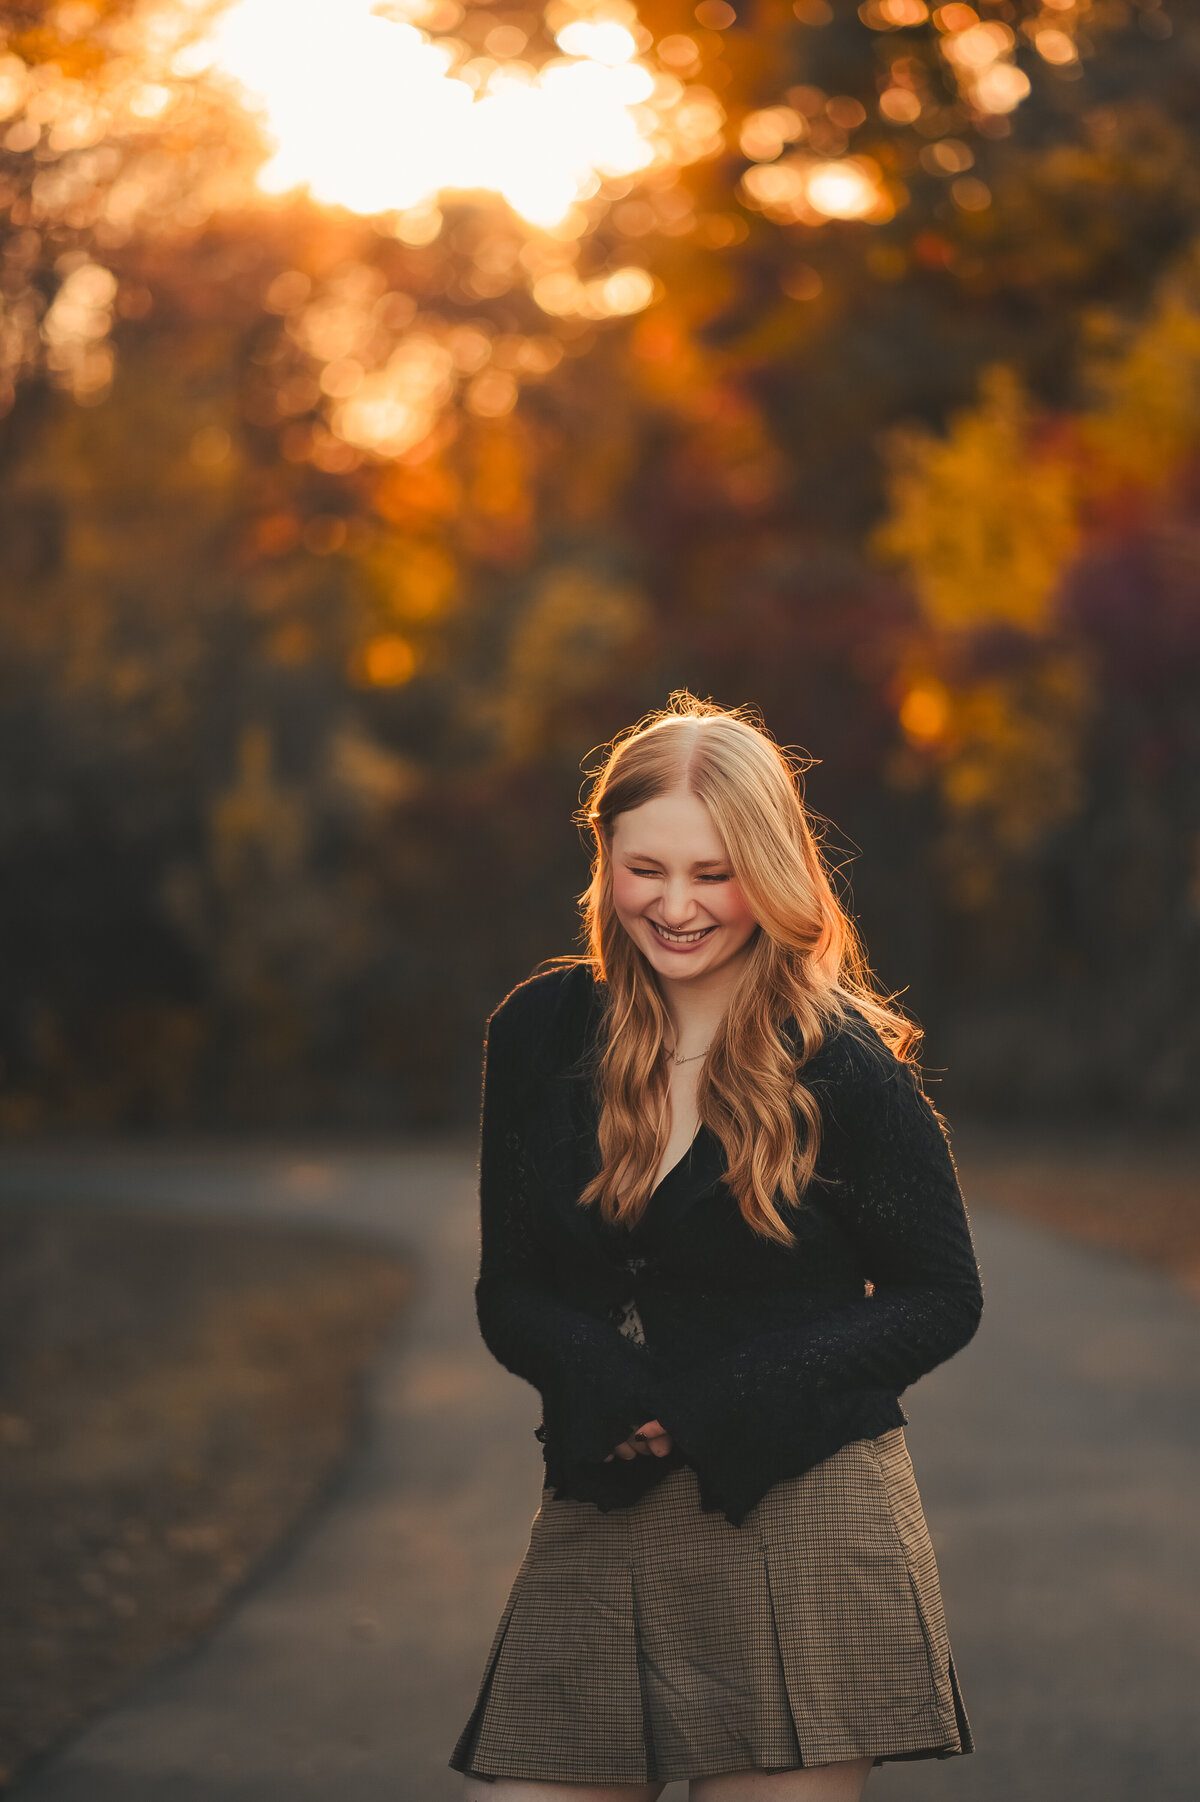 Explore the natural elegance of scenic senior portraits across the Twin Cities. Let Shannon Kathleen Photography transform your memories into timeless art. Reserve your session today.